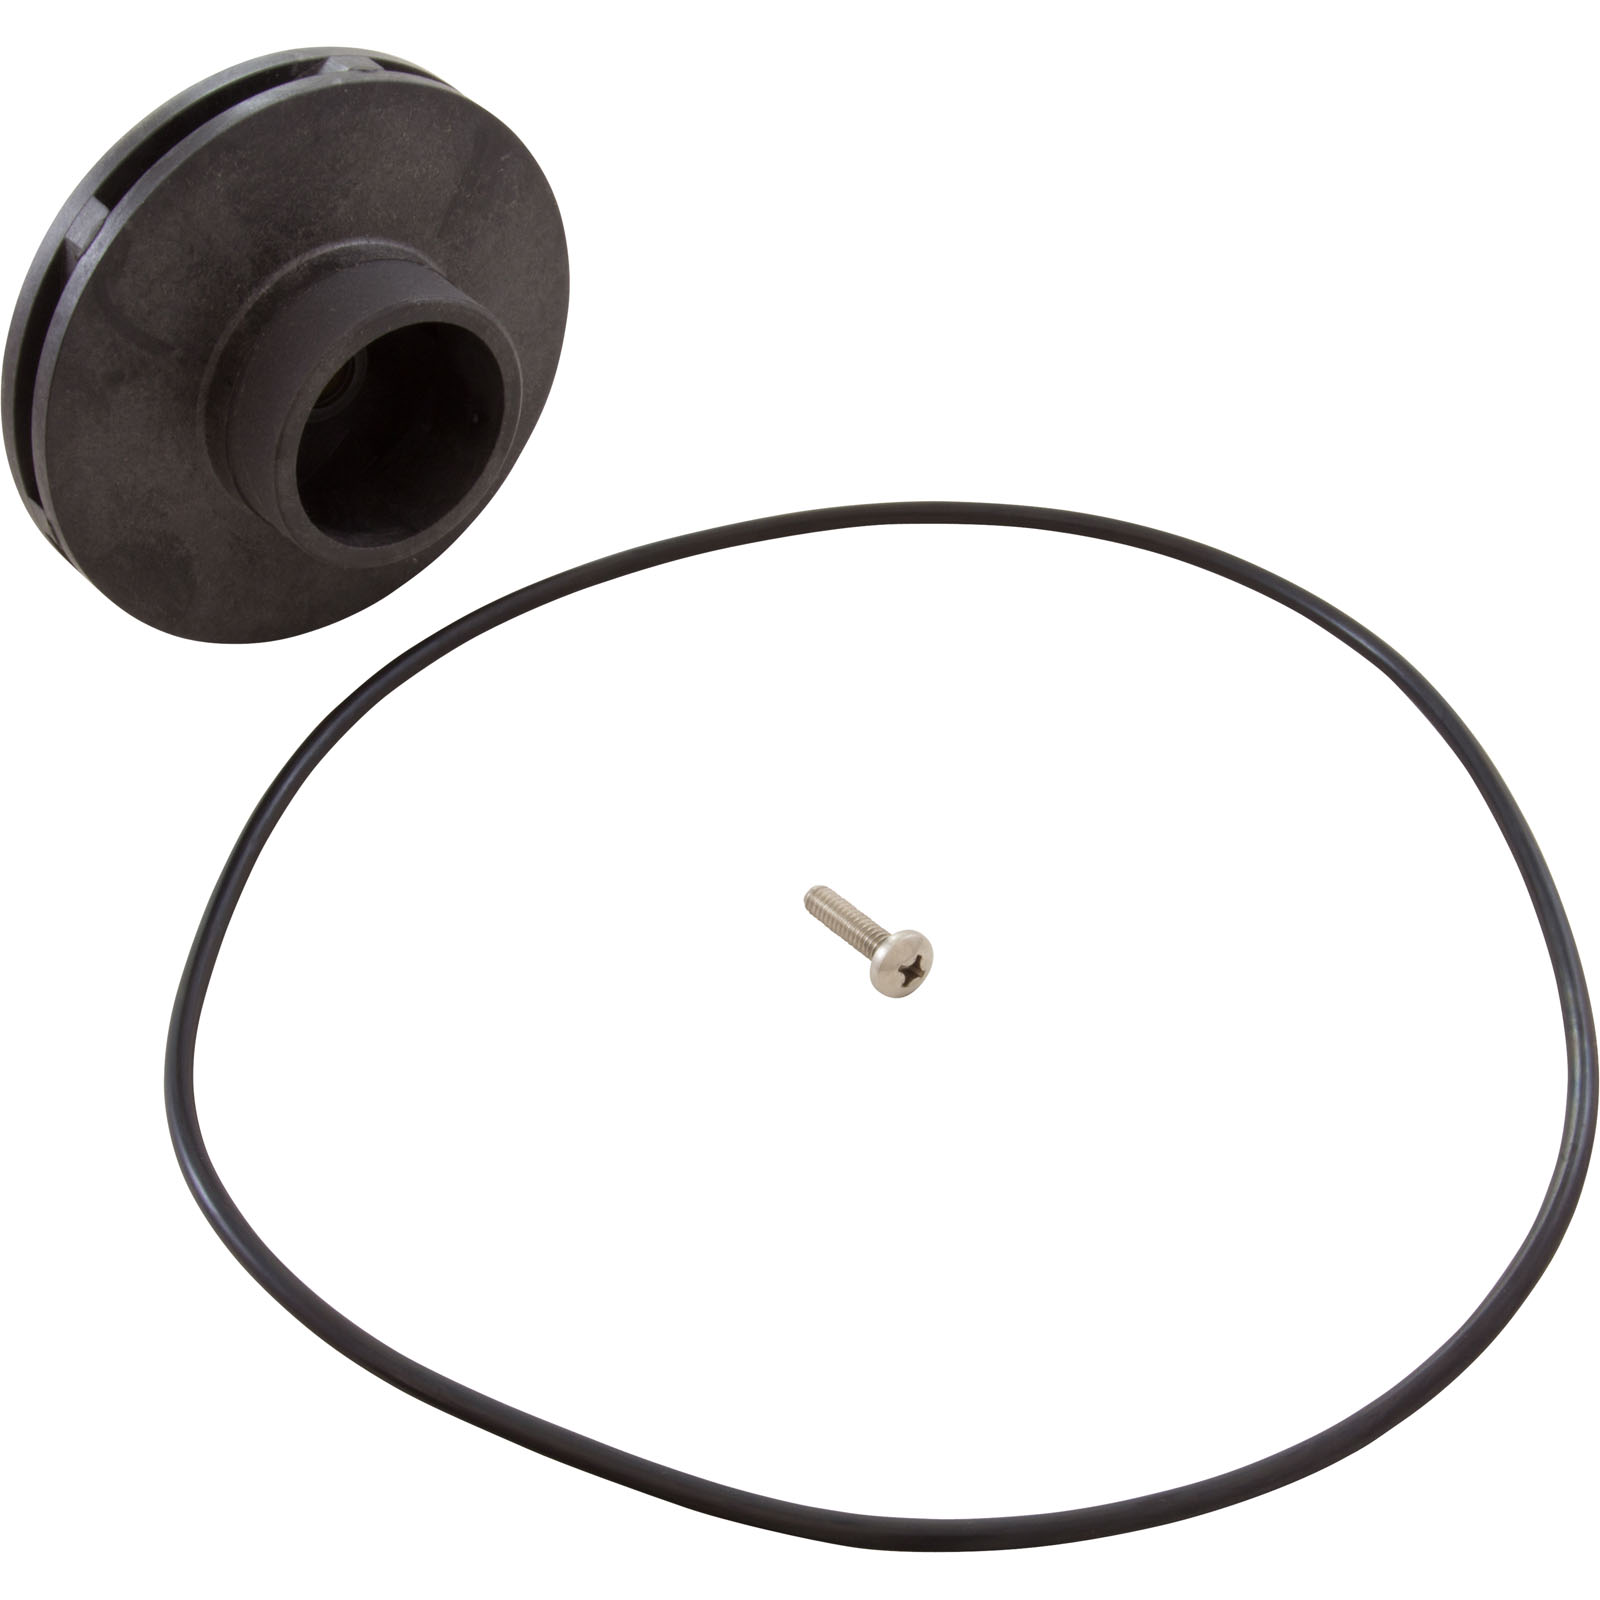 Jandy R0807202 Stealth/PlusHP 1 Full Rate 1.5hp Up Rated Impeller  Replacement Kit